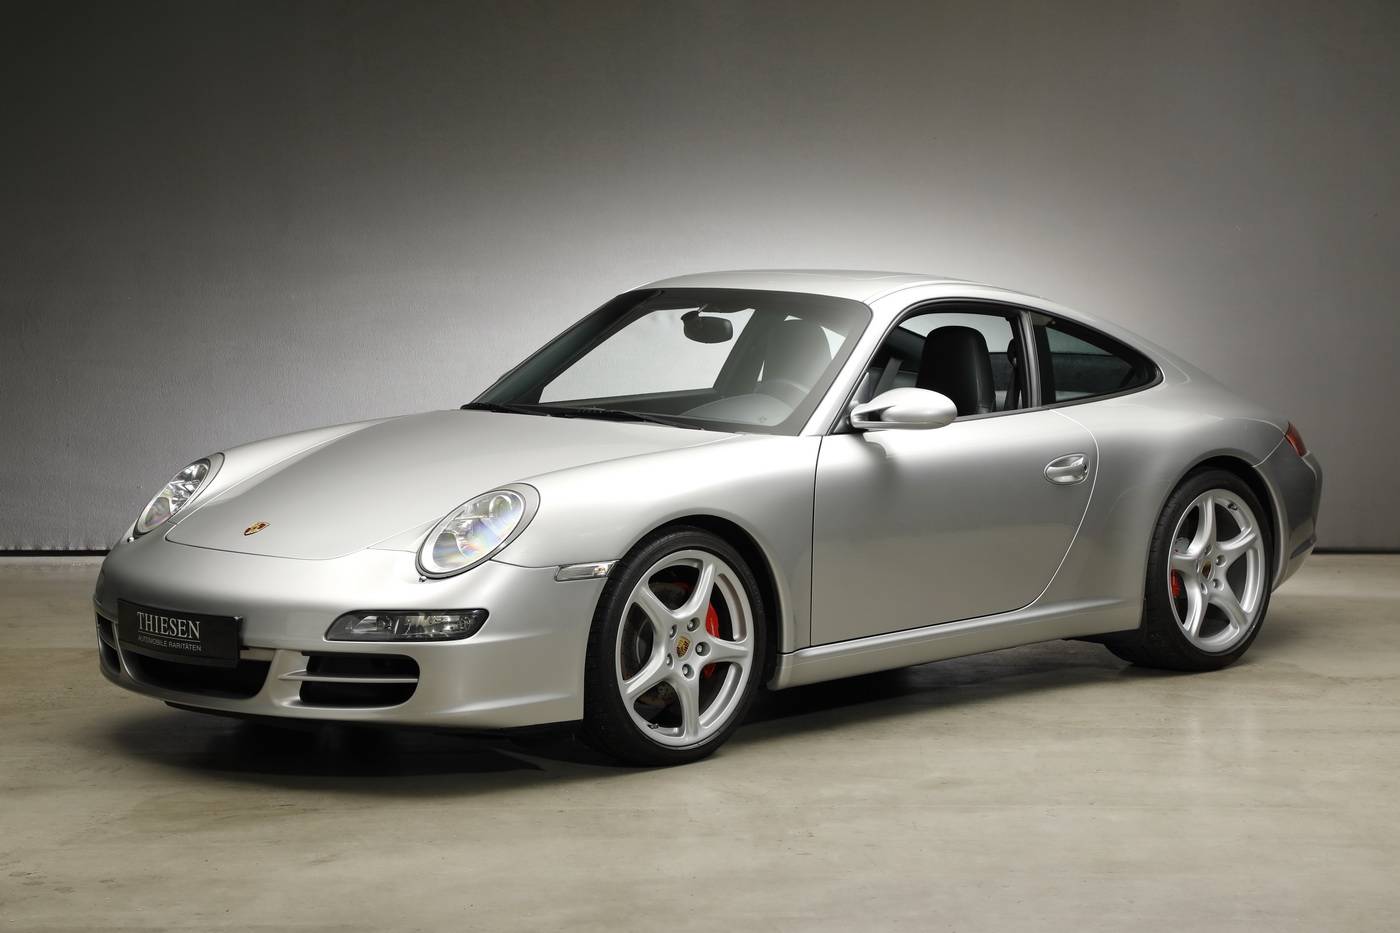 For Sale: Porsche 911 Carrera S (2004) offered for $81,299